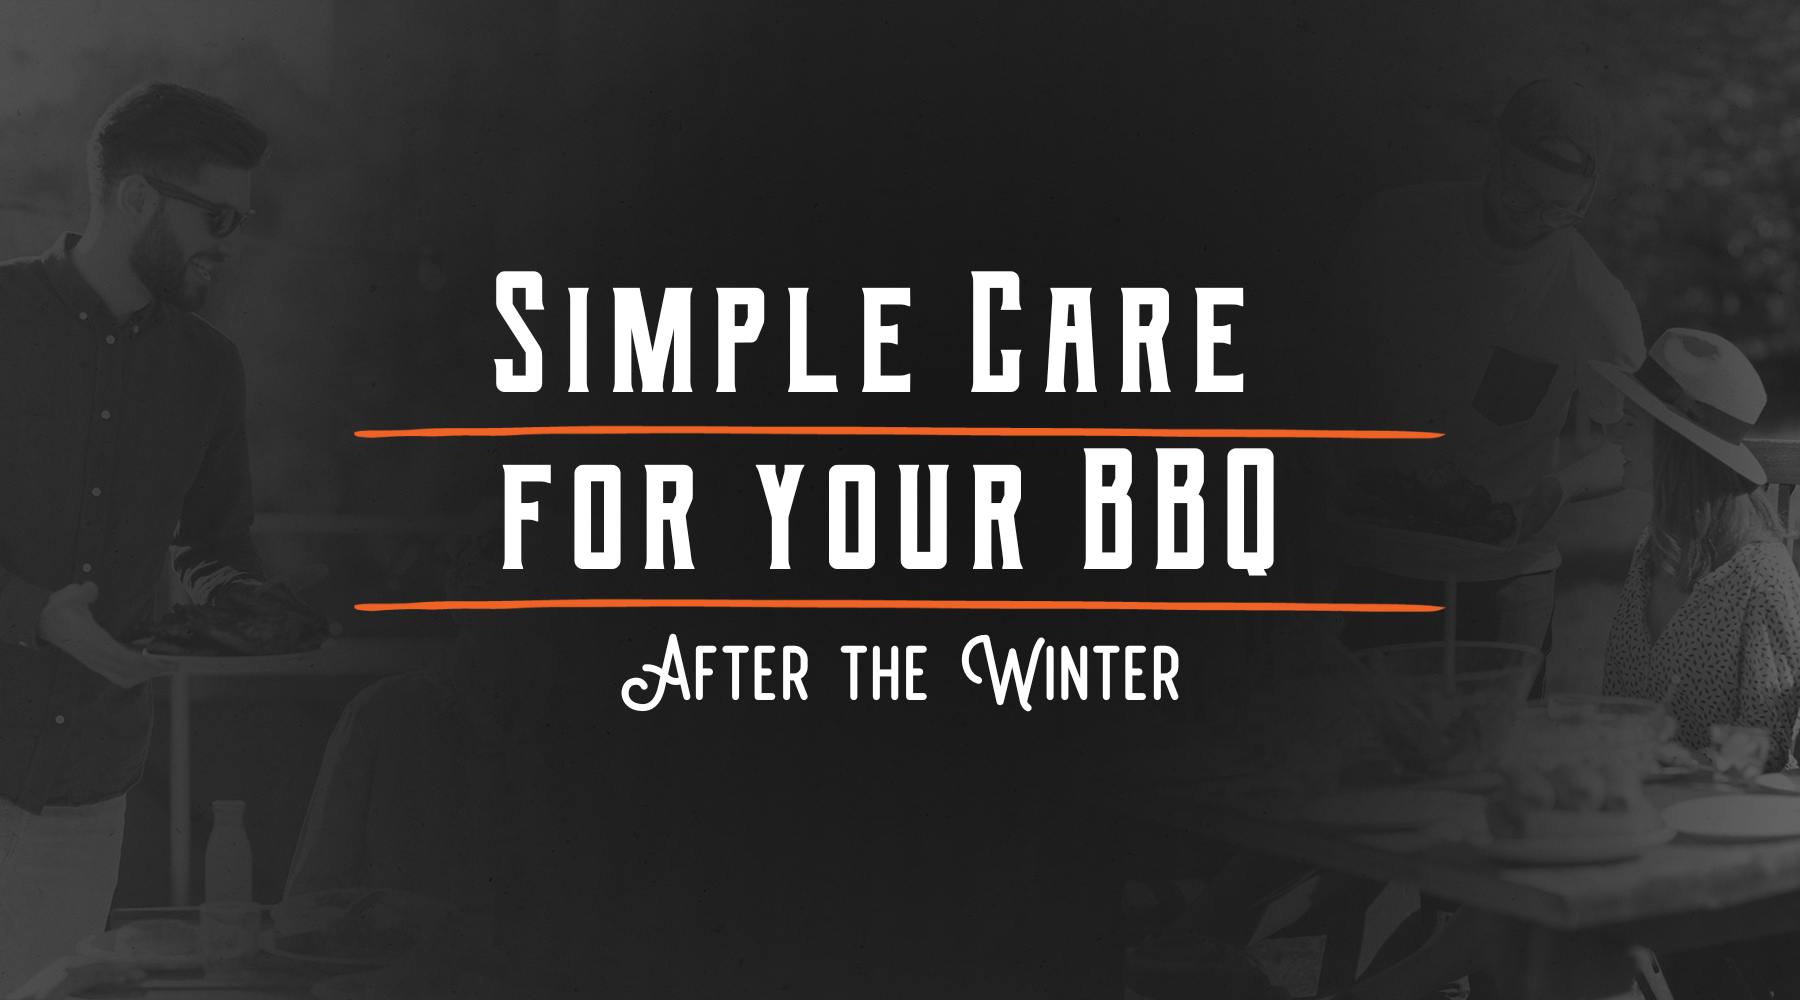 Simple Care Of your BBQ after the Winter!